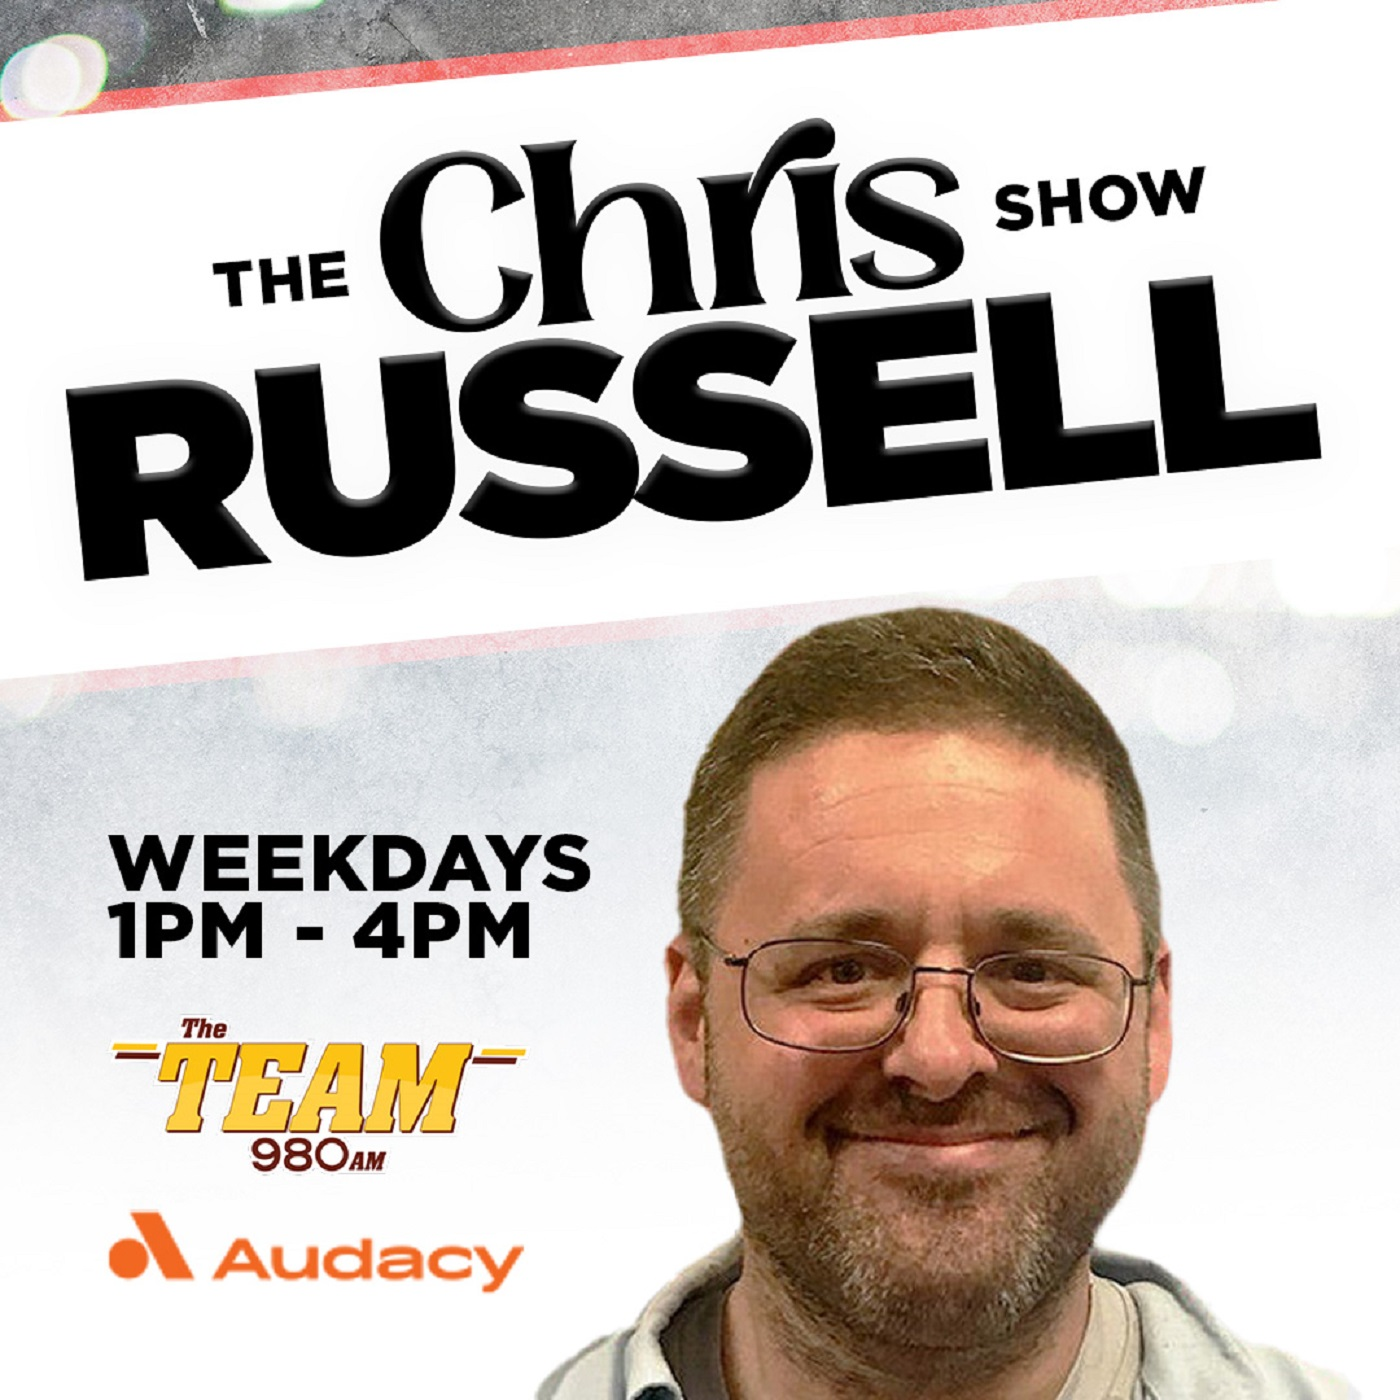 Thom Loverro Joins Russell on the Radio